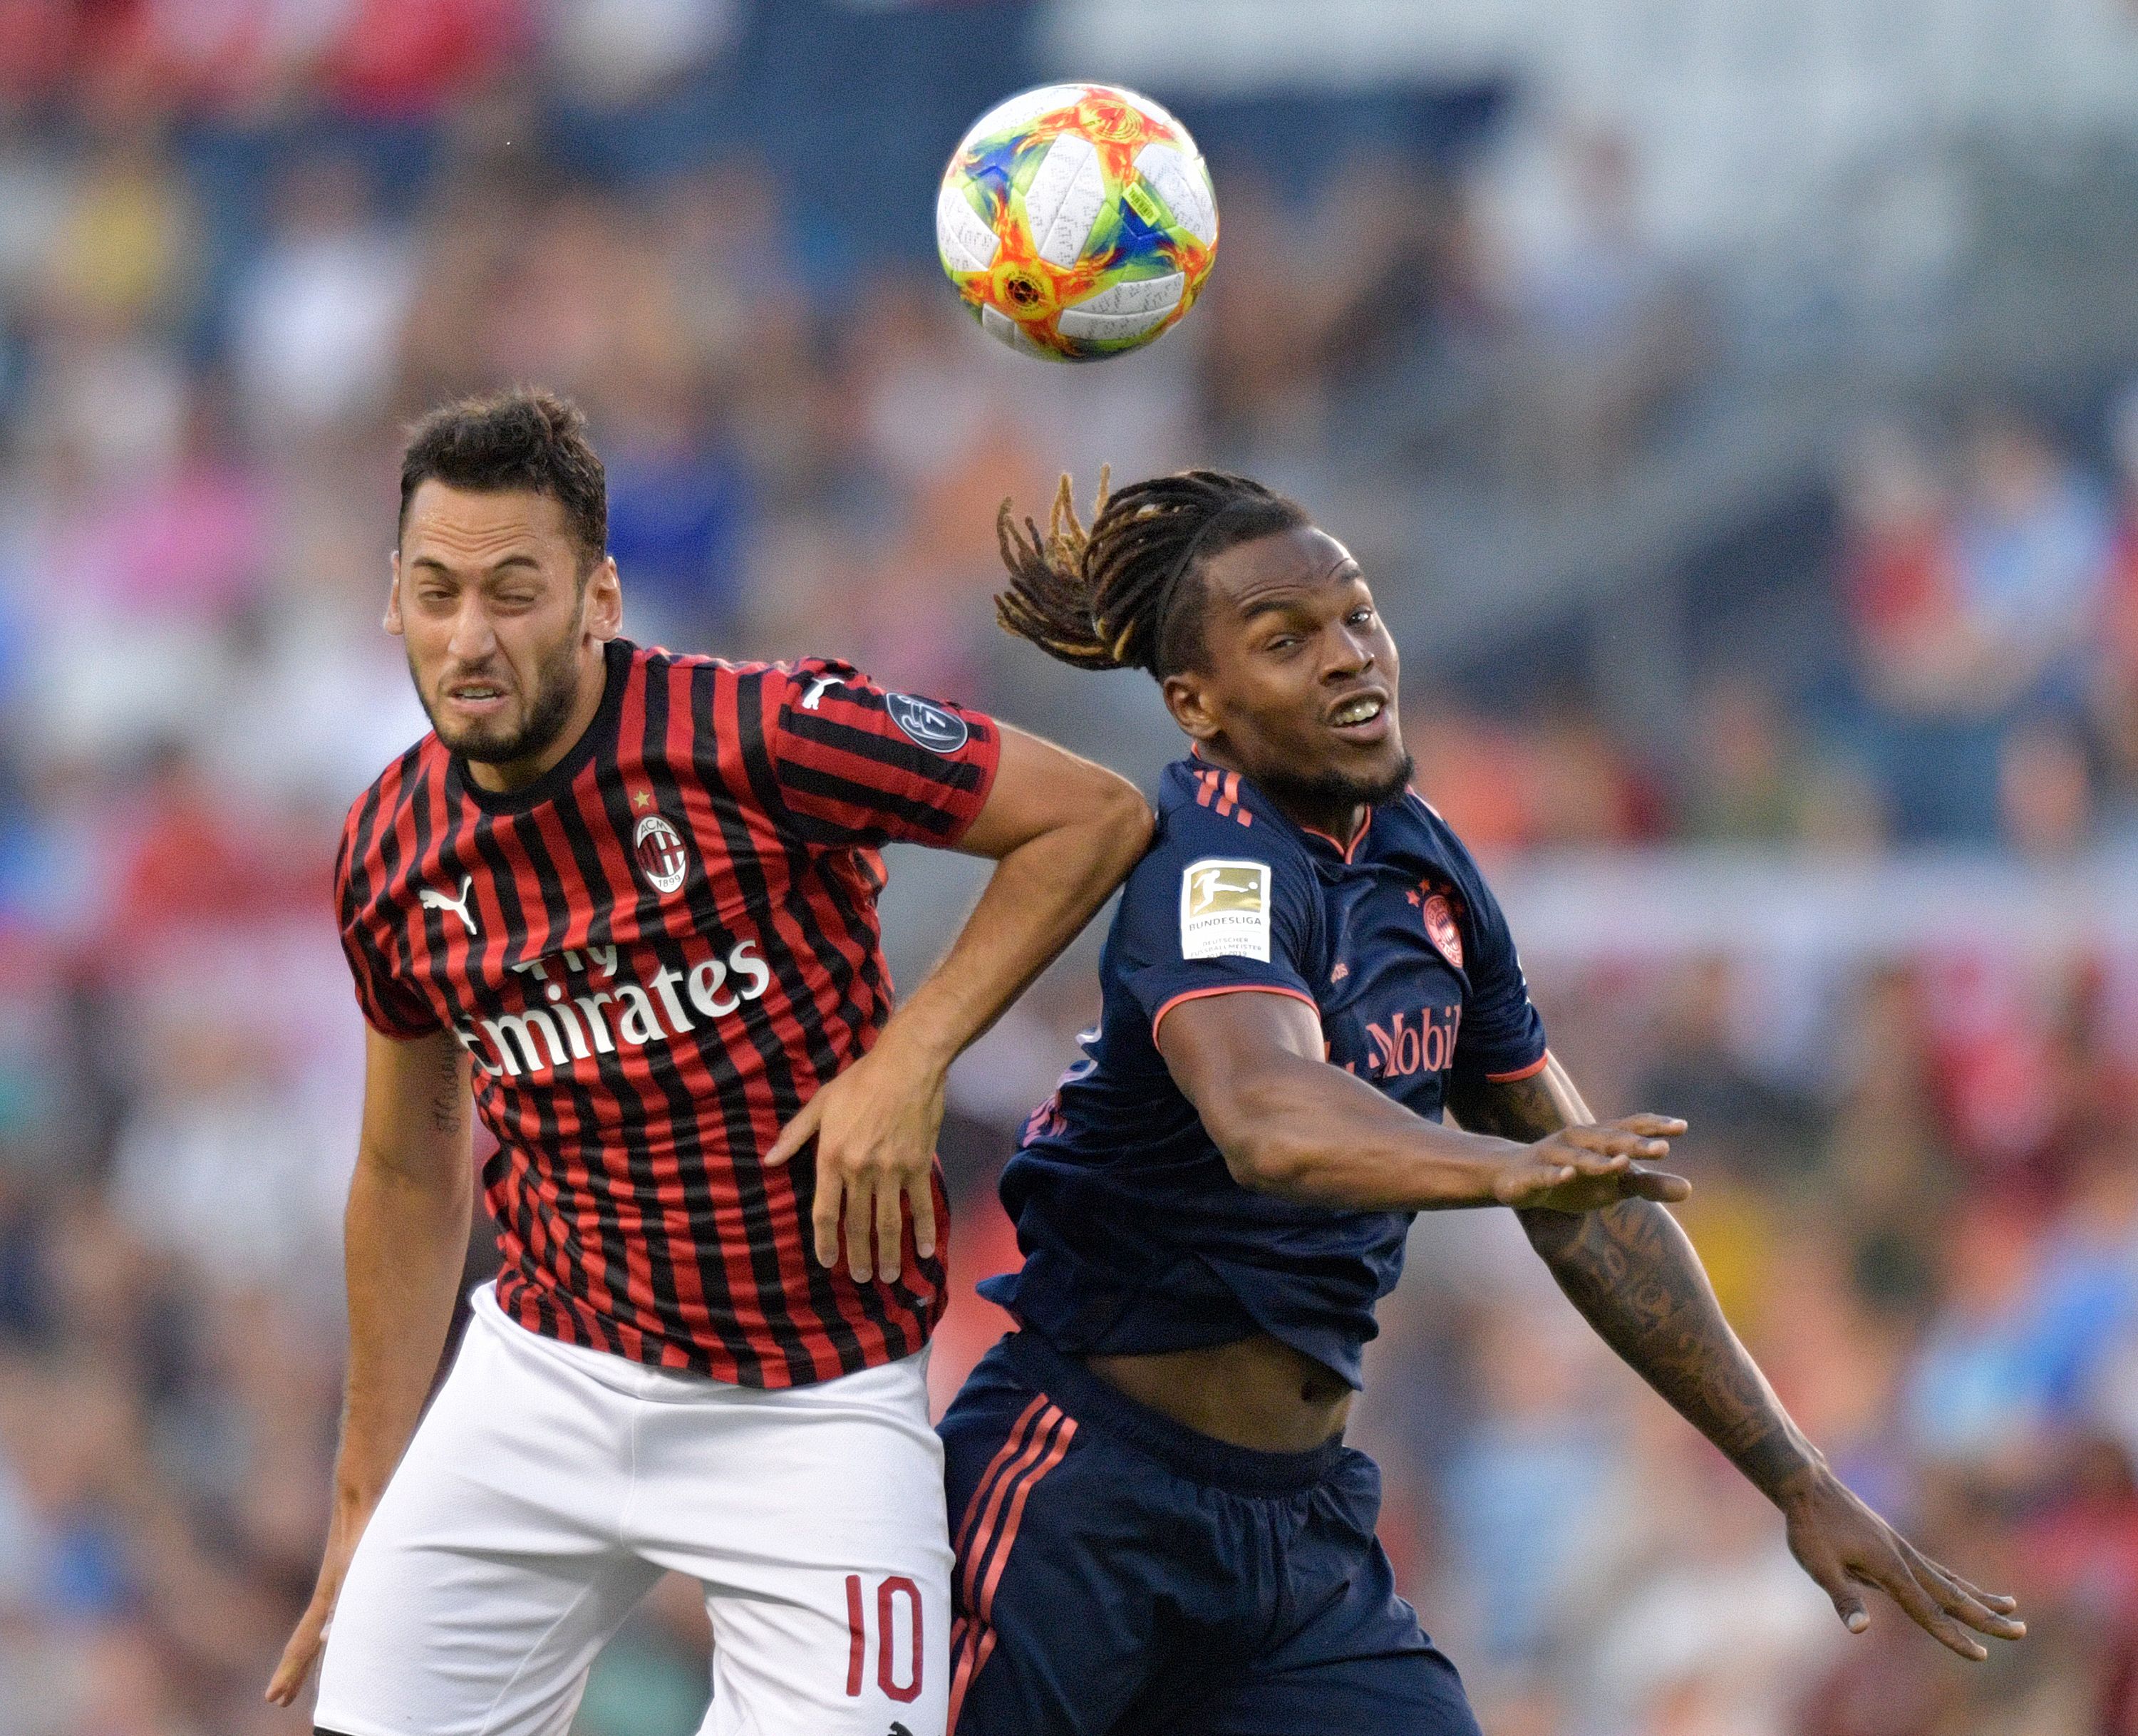 Milan's Hakan Calhanoglu (L) and Bayern Munich's Renato Sanches leap for a header during the International Champions Cup football match between Fc Bayern and AC Milan at Children's Mercy Park in Kansas City, Missouri on July 23, 2019. (Photo by Tim VIZER / AFP) (Photo credit should read TIM VIZER/AFP/Getty Images)